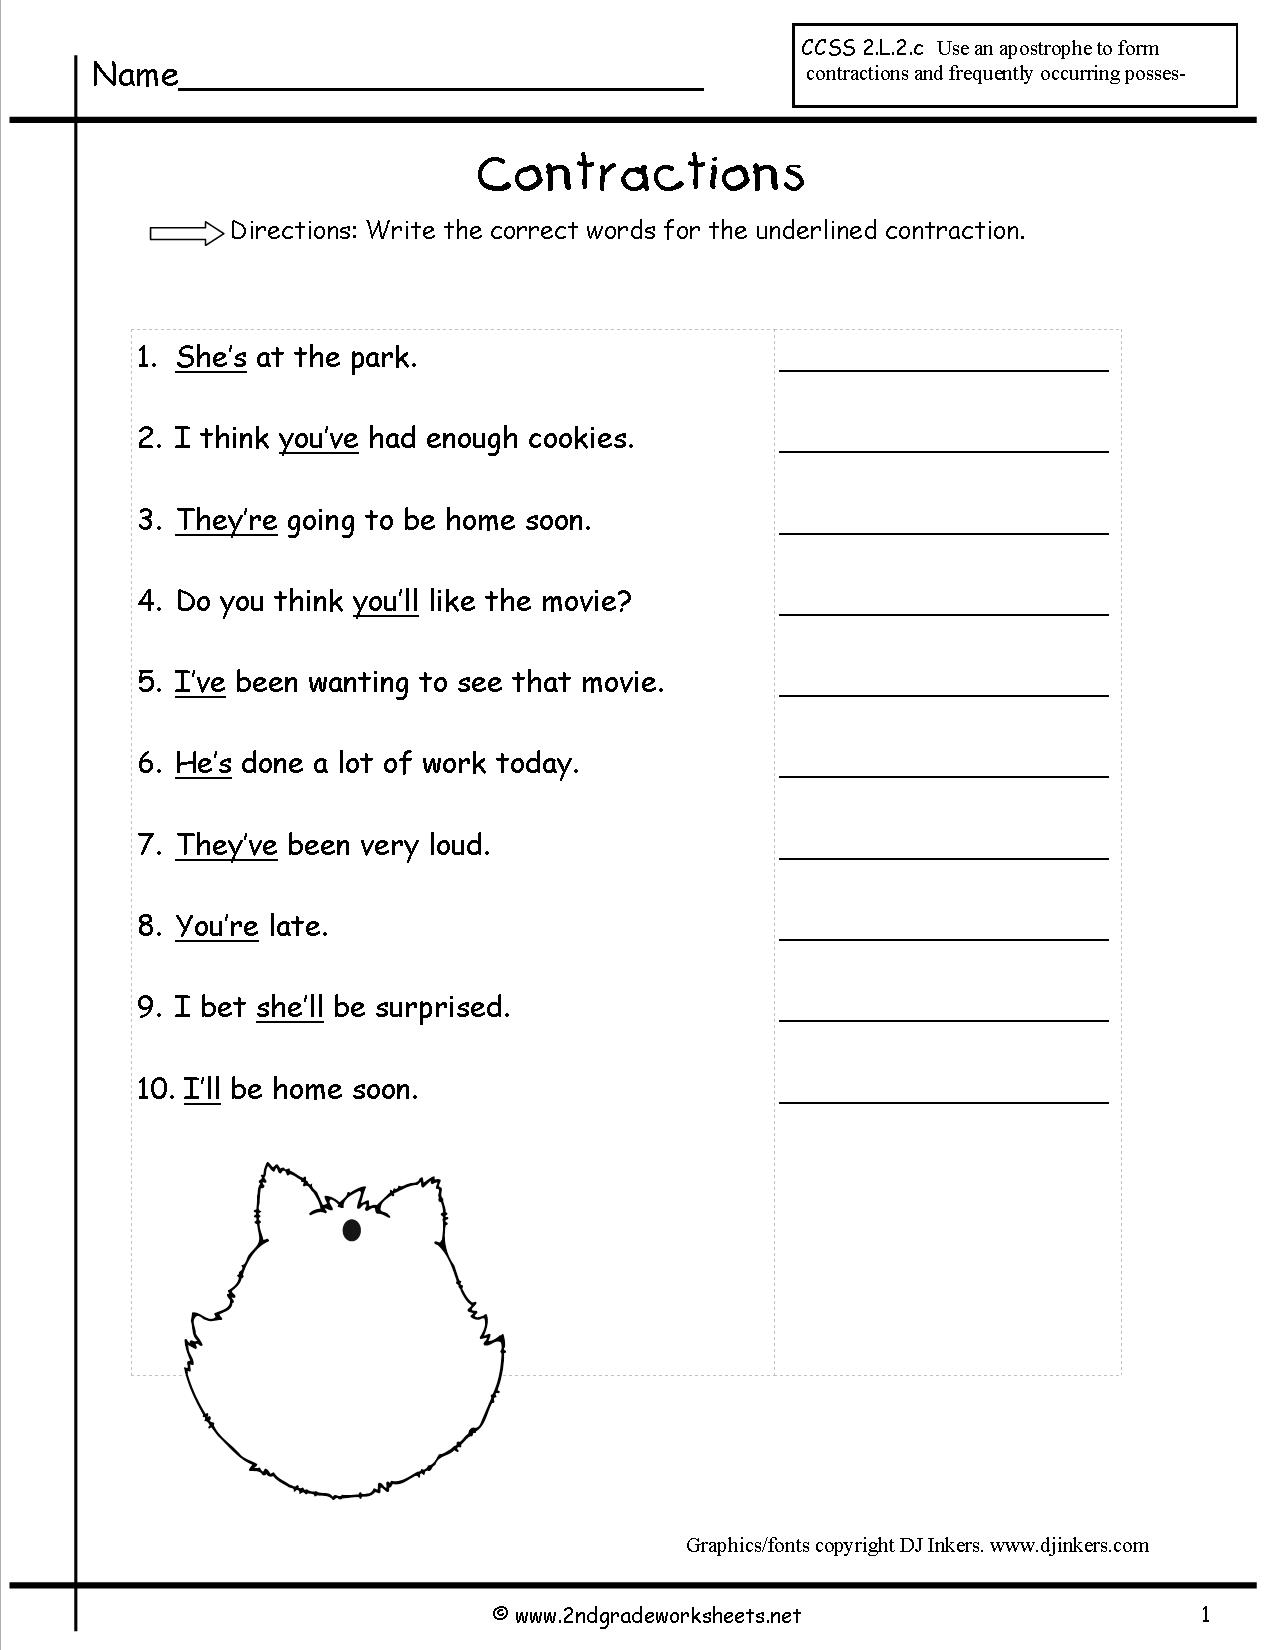 Free Contraction Worksheets